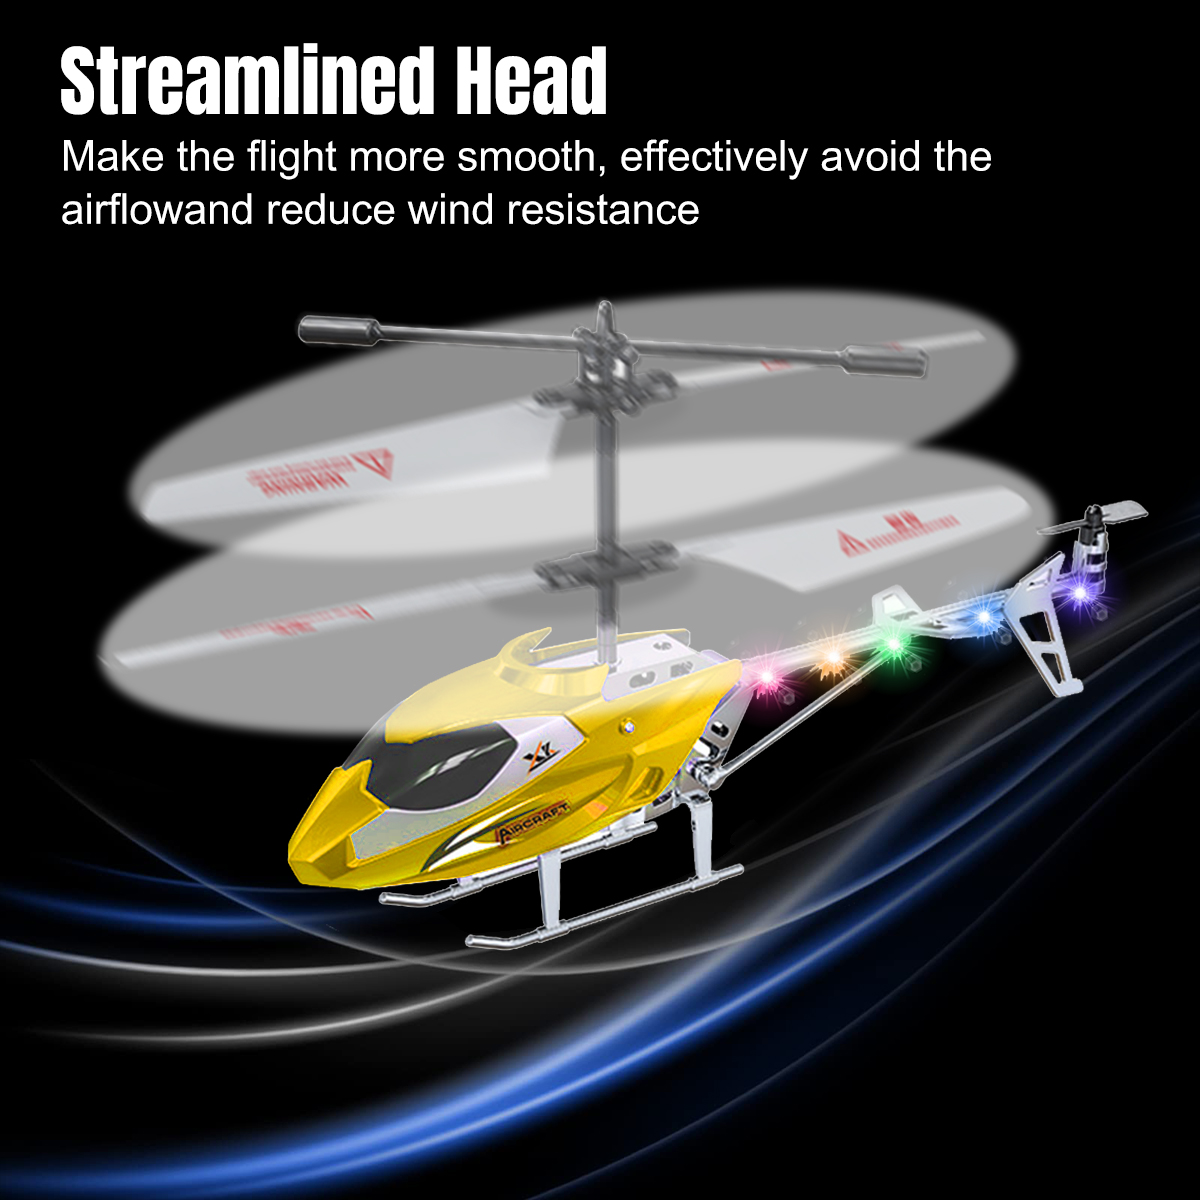 PayUSD Remote Control Helicopter Mini Gyroscope RC Helicopters LED Light for Indoor to Fly for Kids and Beginners, Yellow - image 5 of 8